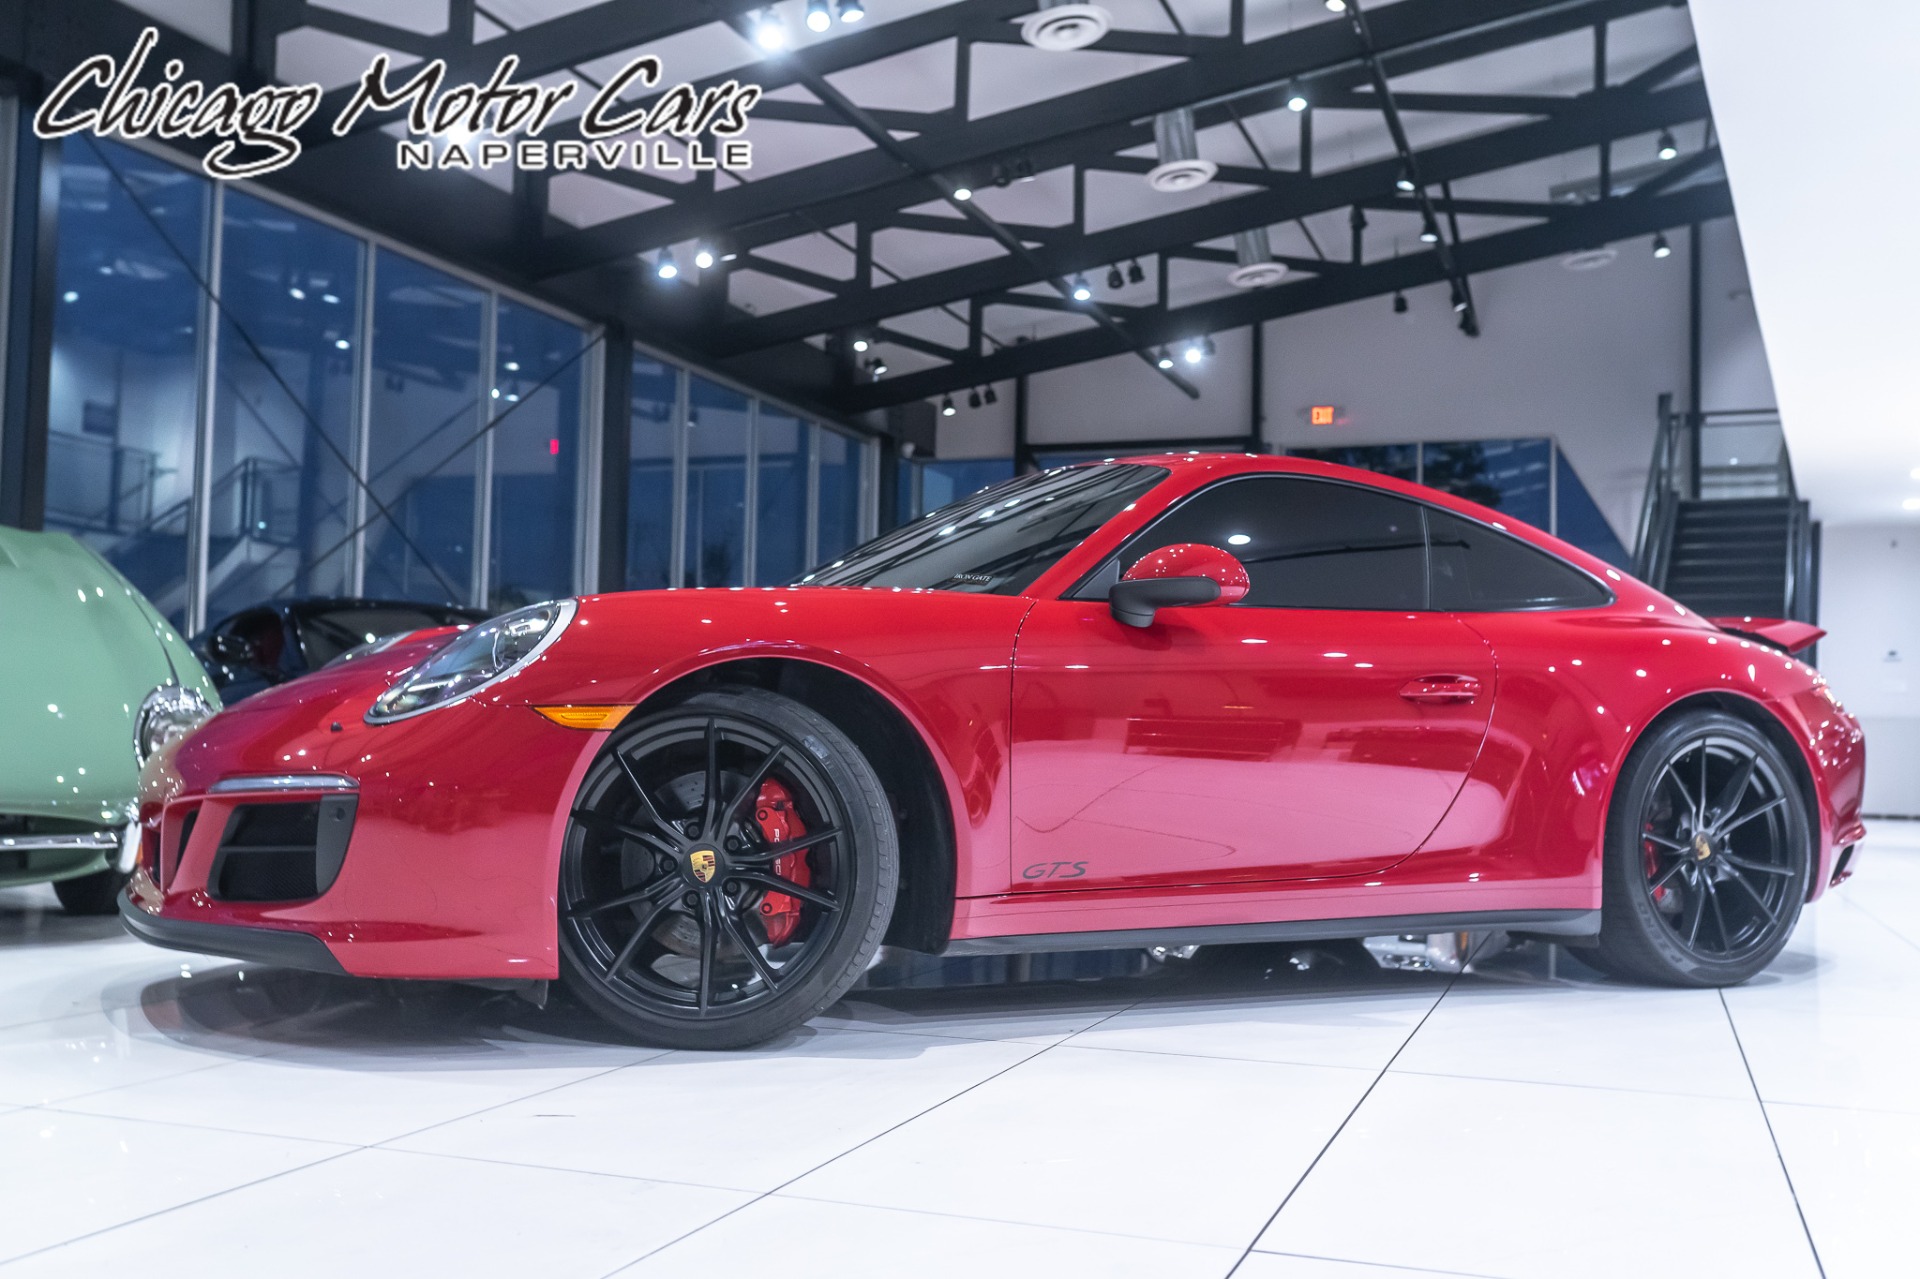 Used-2017-Porsche-911-Carrera-GTS-Coupe-MSRP-137K-Full-Front-PPF-Upgraded-Exhaust